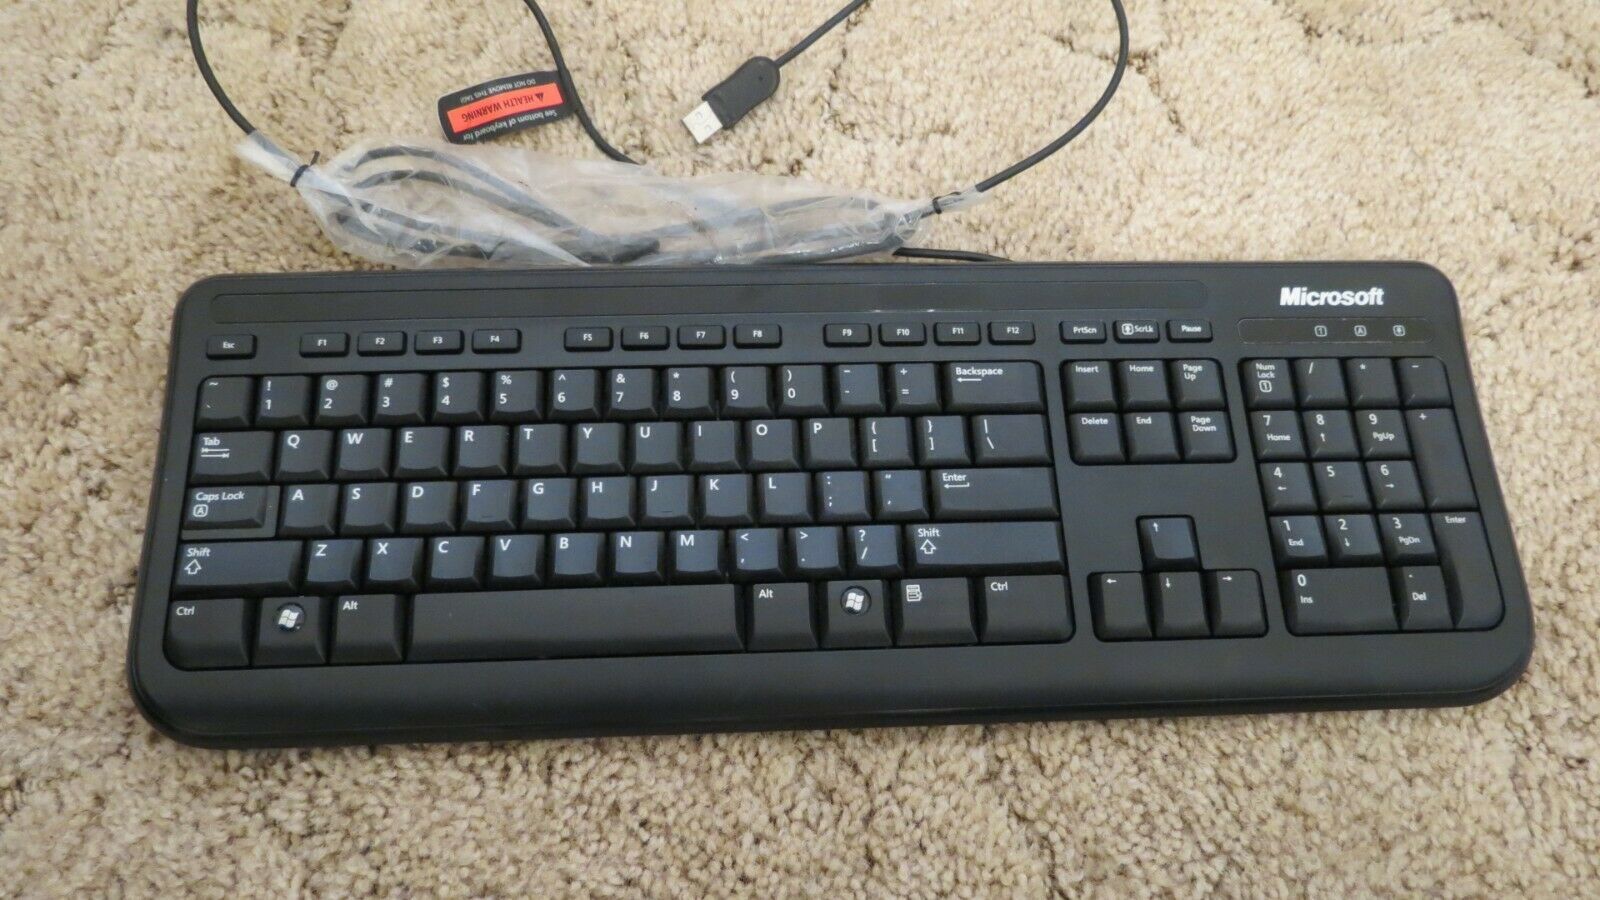 Primary image for Microsoft USB Wired Keyboard 400v1.0 Model 1366